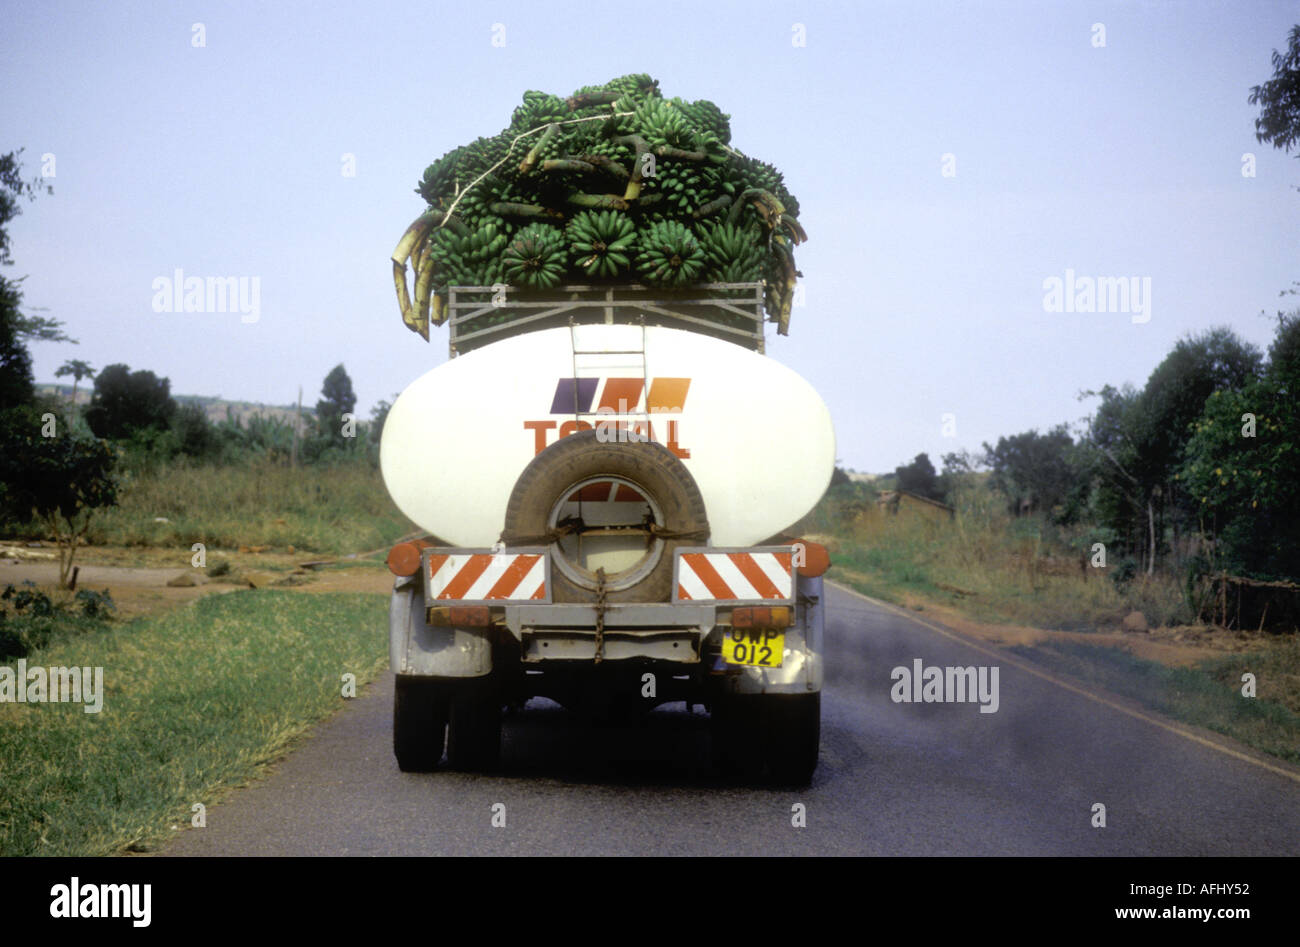 Total petrol or gasoline tanker with load of bananas on top Uganda Stock Photo